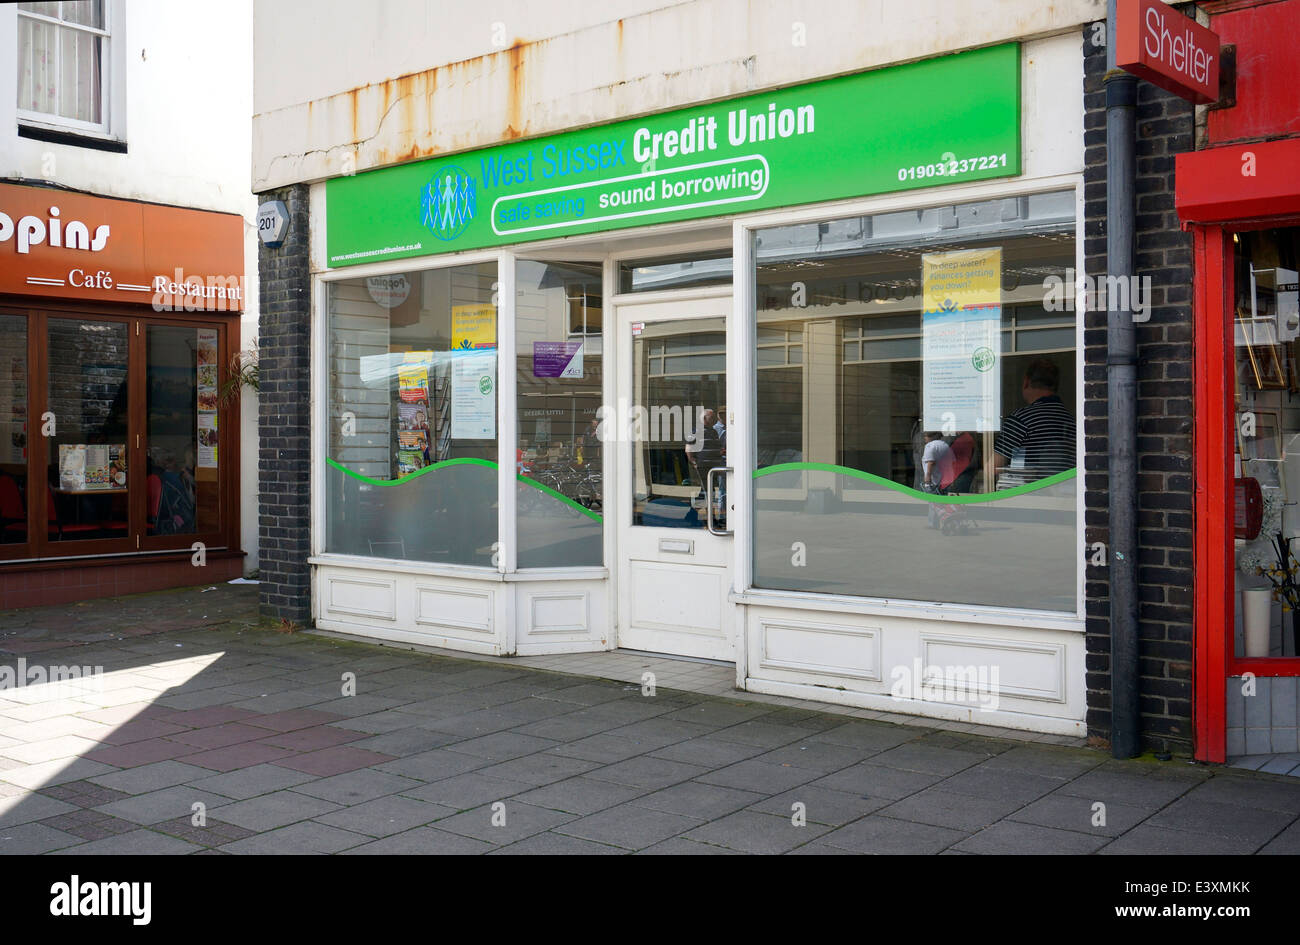 West Sussex Credit Union (safe saving sound borrowing) shop for loans Worthing town centre West Sussex UK Stock Photo